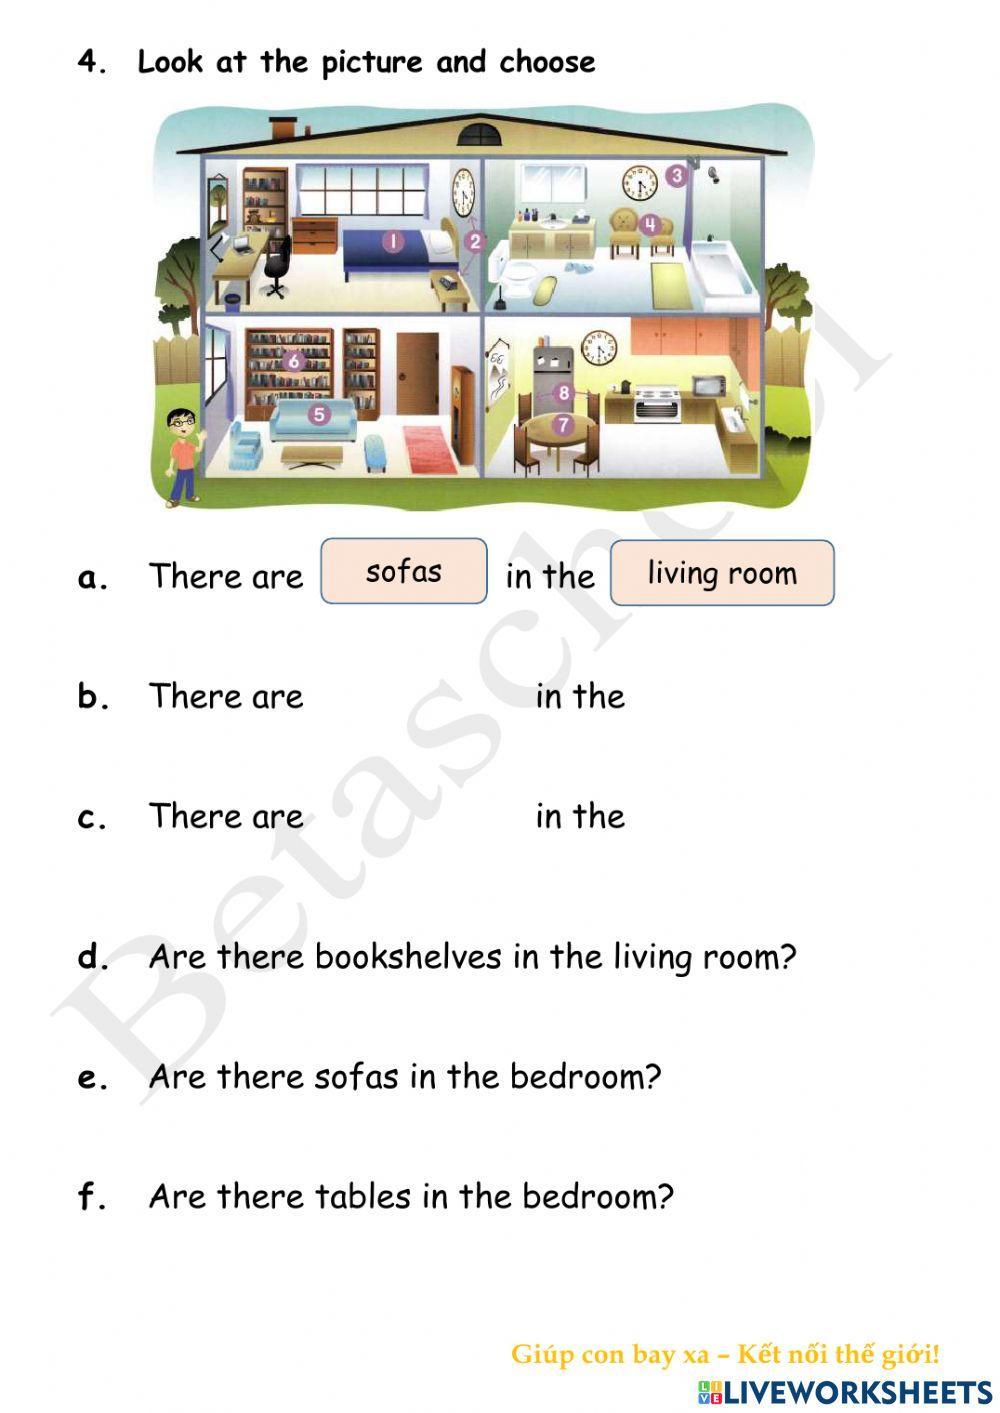 Topic - Home - BE1A